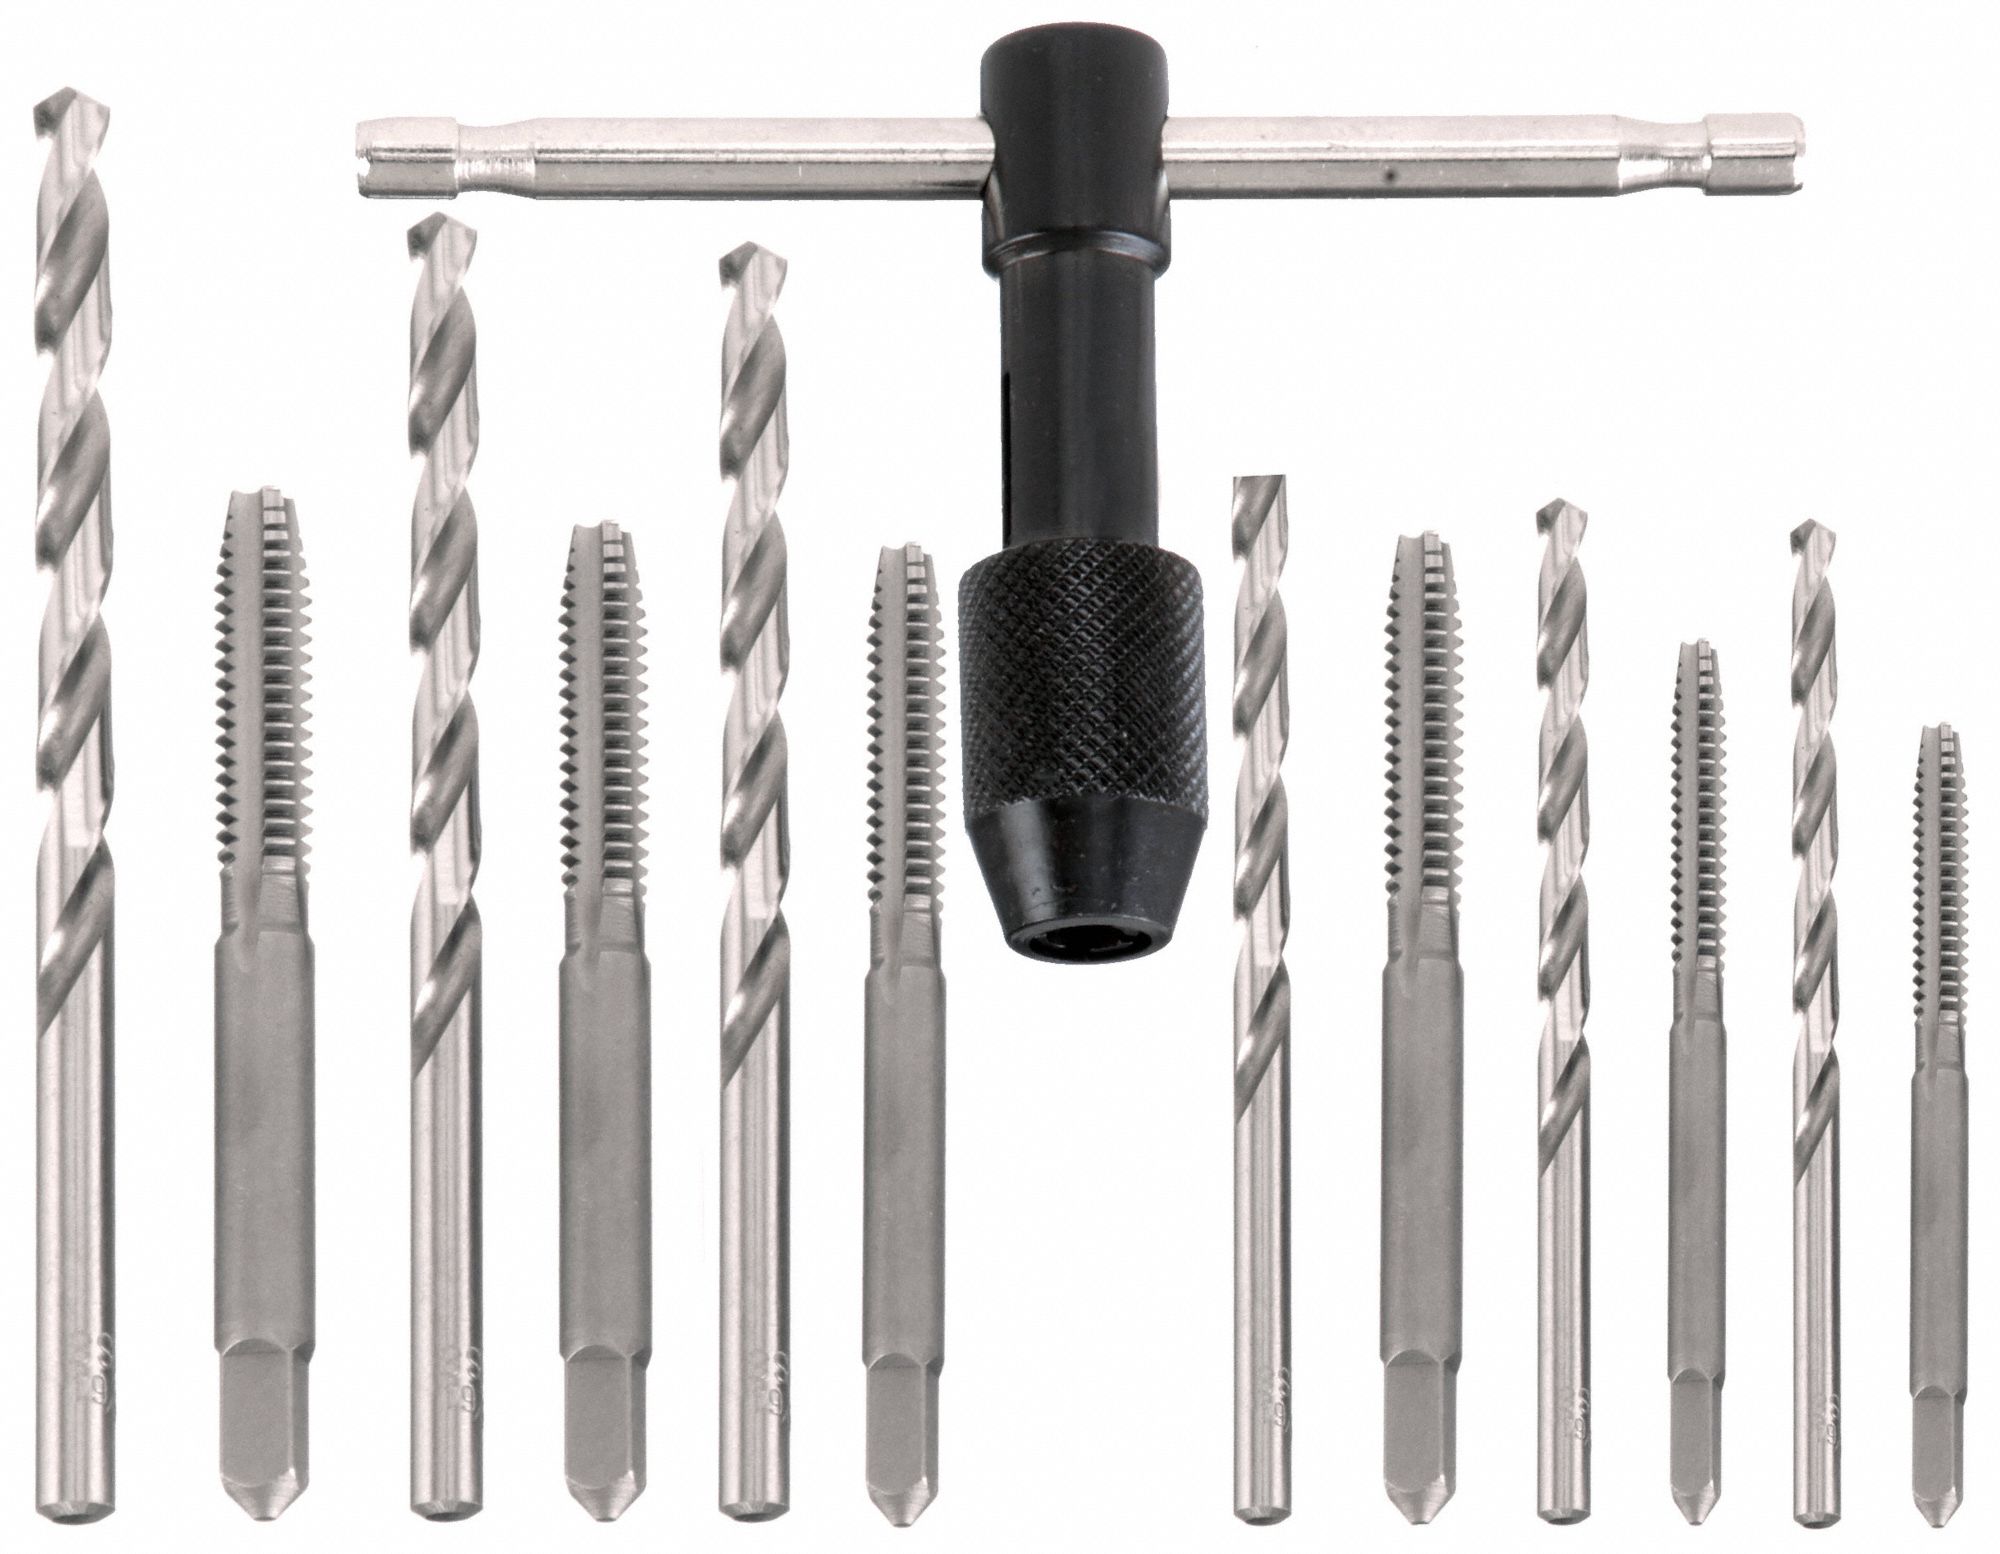 IRWIN HANSON, 13 Pieces, #4-40 Smallest Thread Size, Drill Bit and Tap